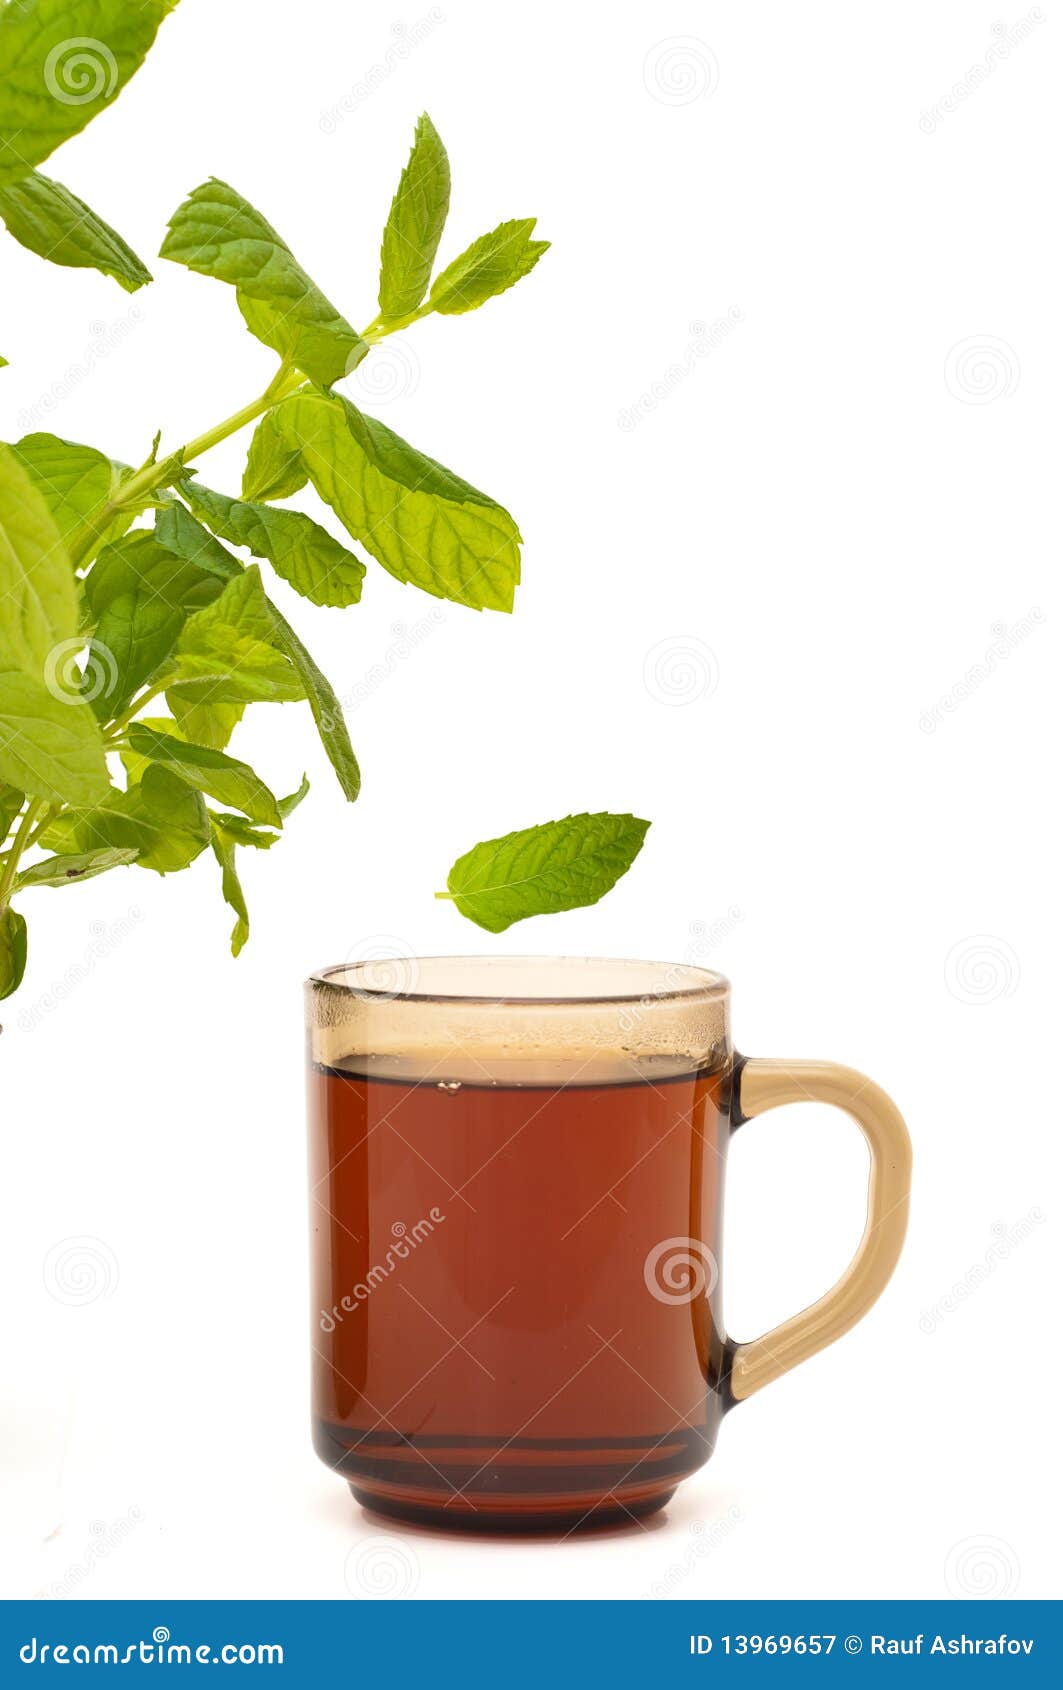 Mint tea stock image. Image of isolated, beverage, gourmet - 13969657